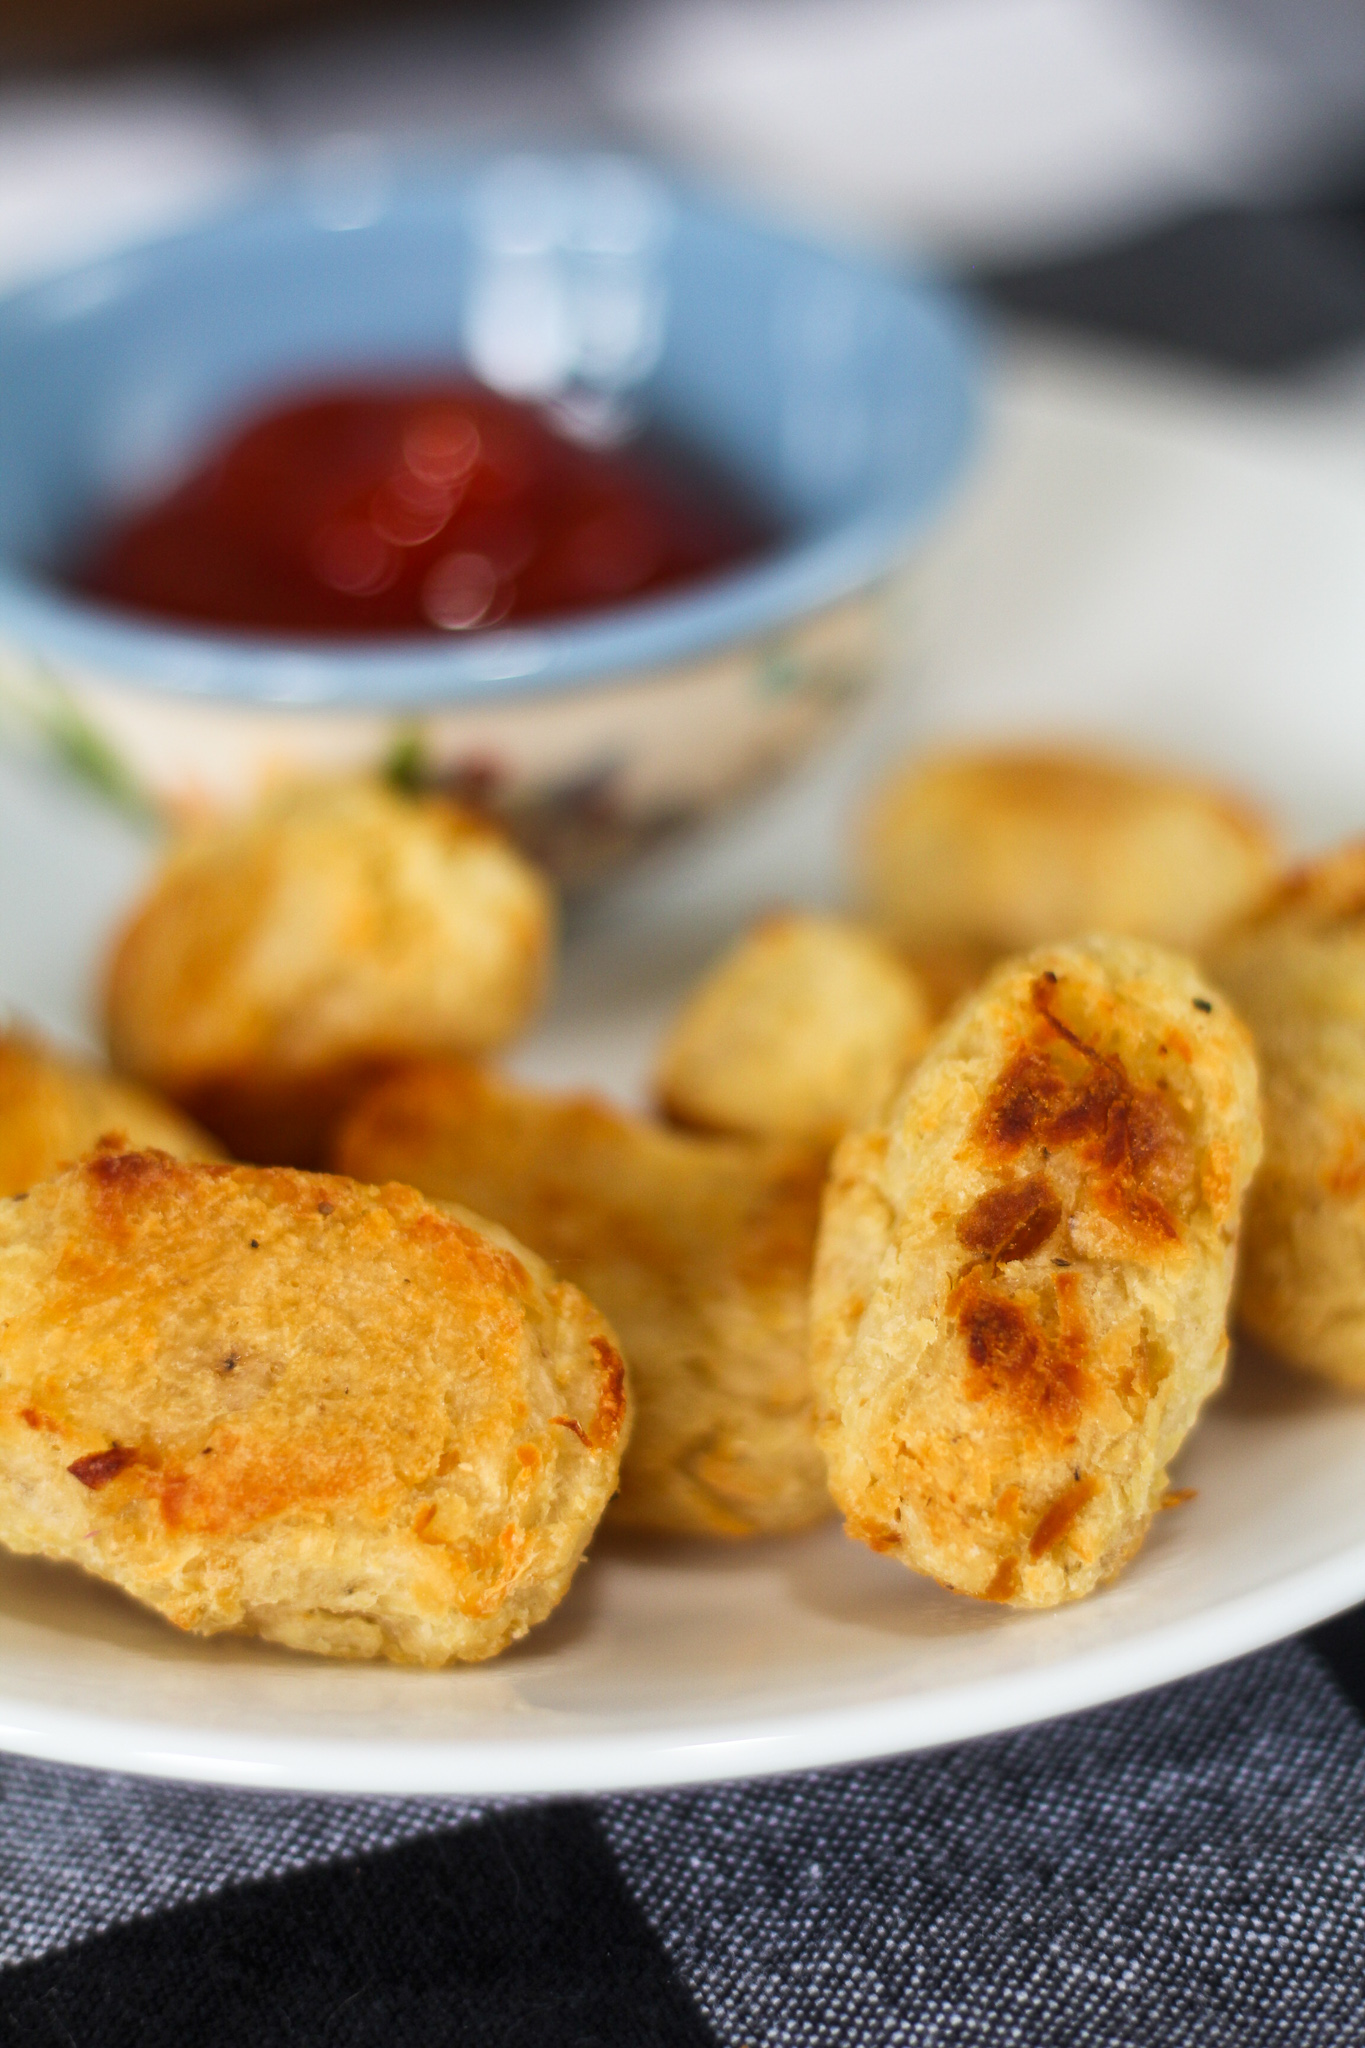 How to Make Homemade Tater Tots